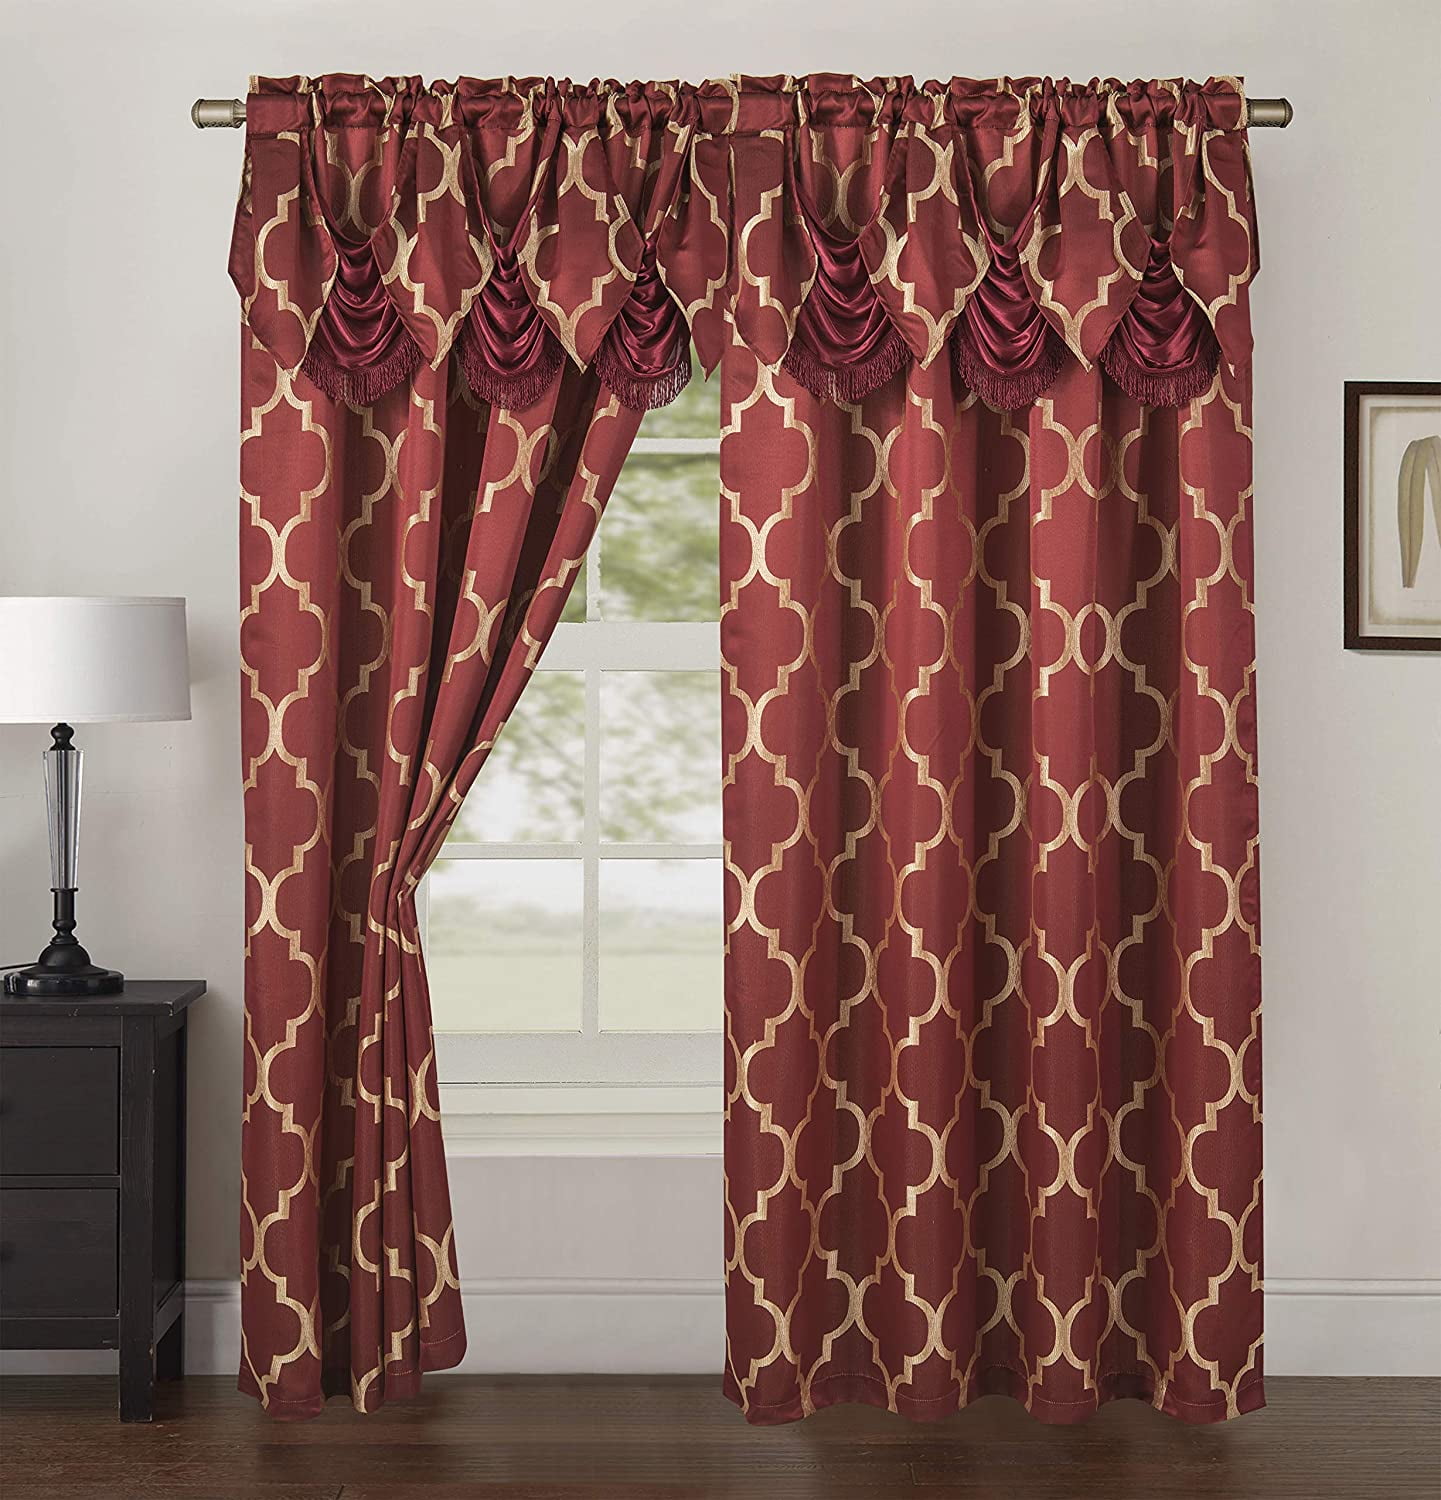 Details about   Beige Linen Tulle Curtains Living Room Kitchen Classical Solid Color Drape Panel 